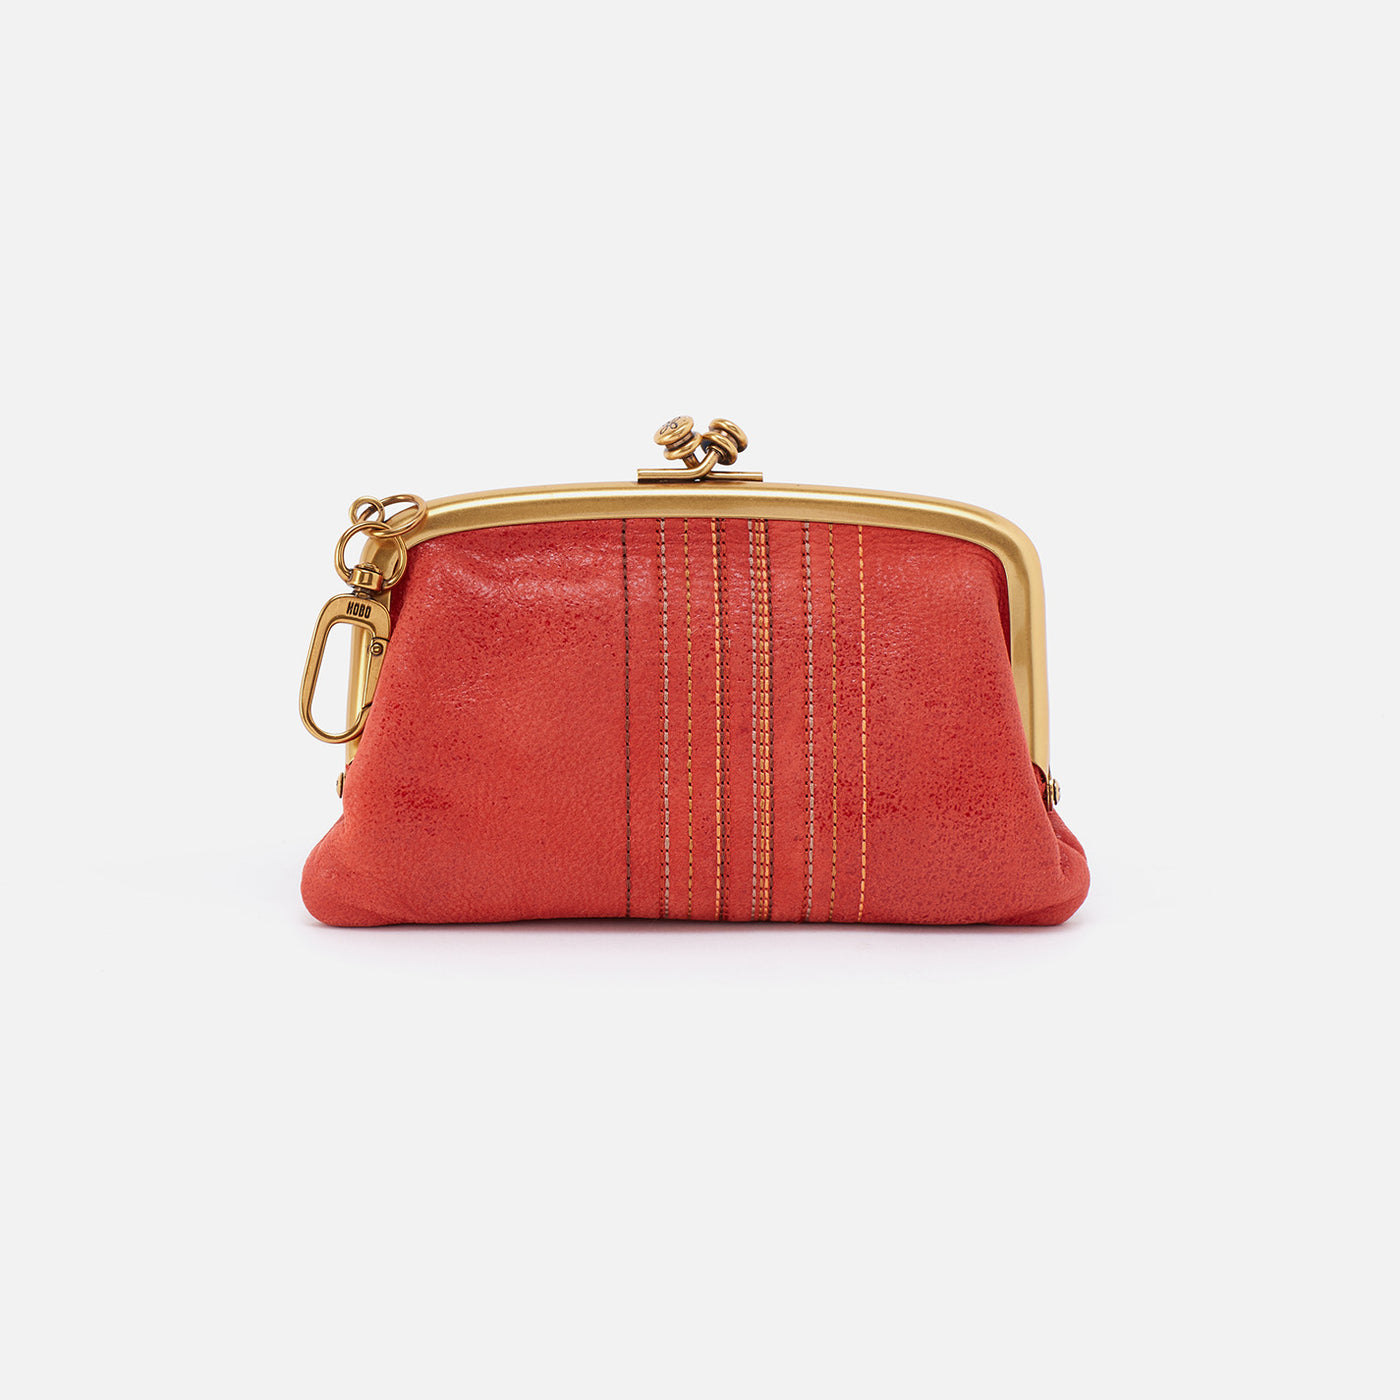 Cheer Frame Pouch in Buffed Leather - Chili